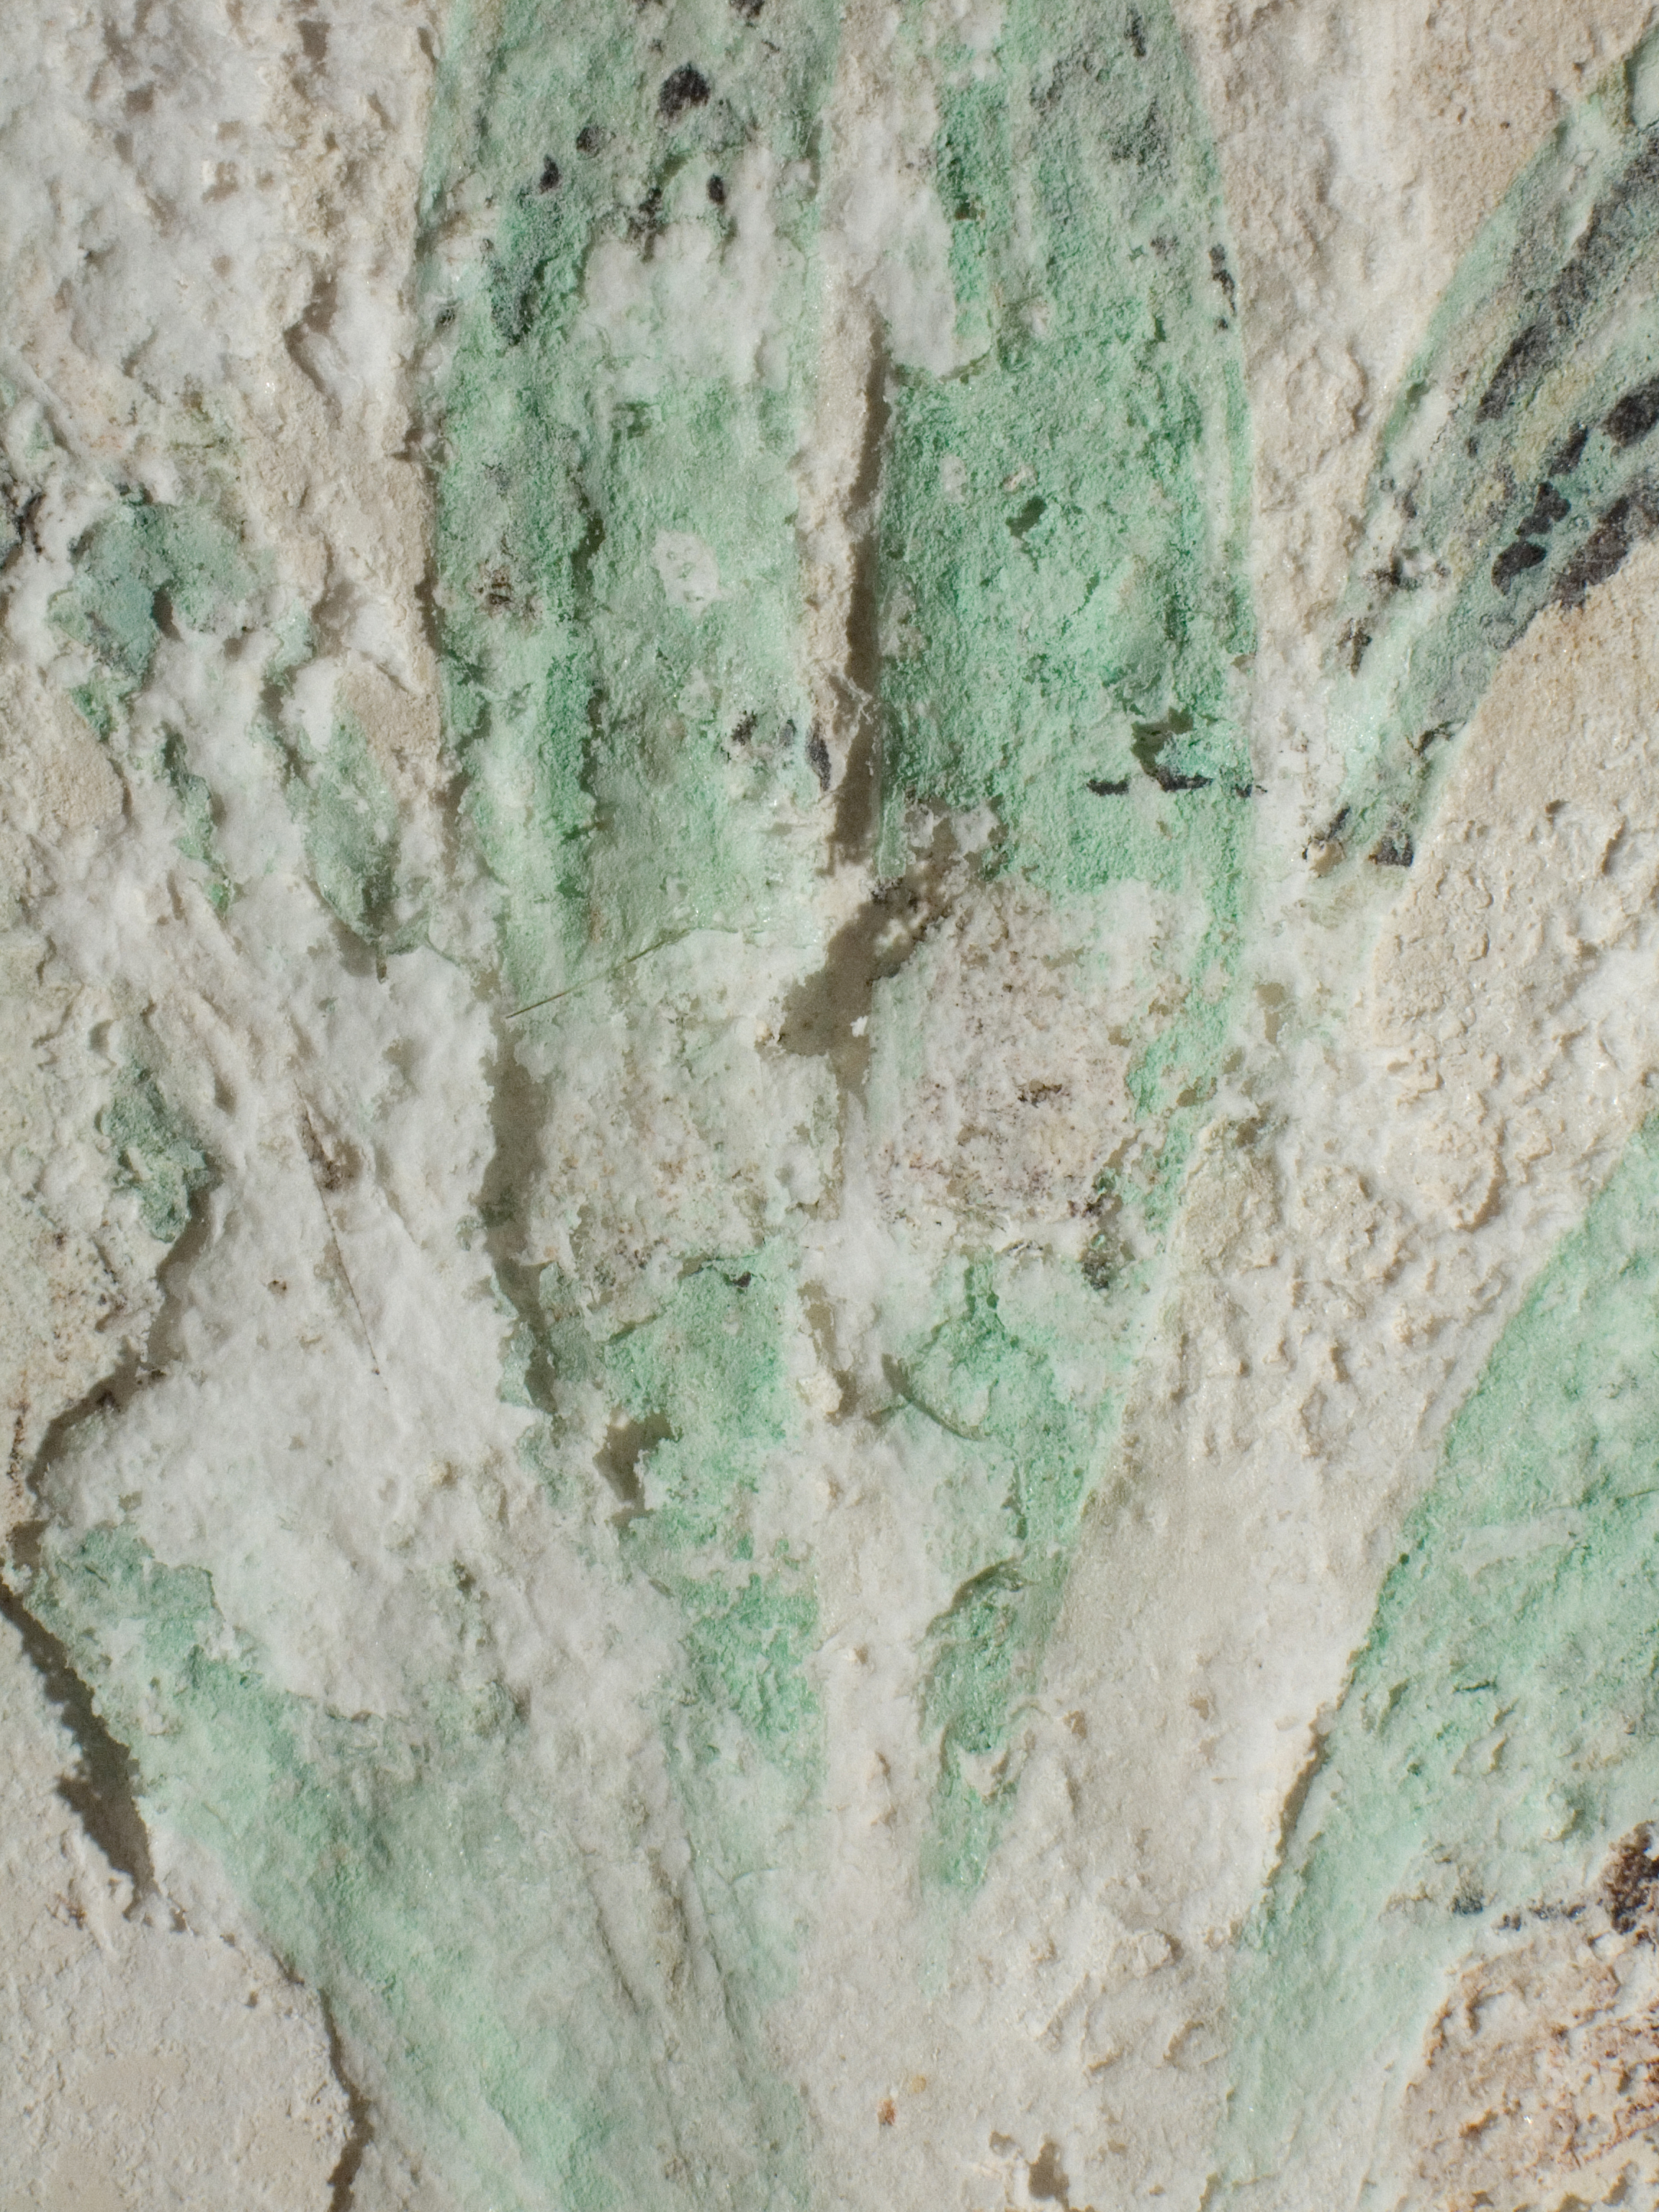  Salt crystals were pushing layers of paint off the wall.&nbsp;    Image © Courtauld CWPD 